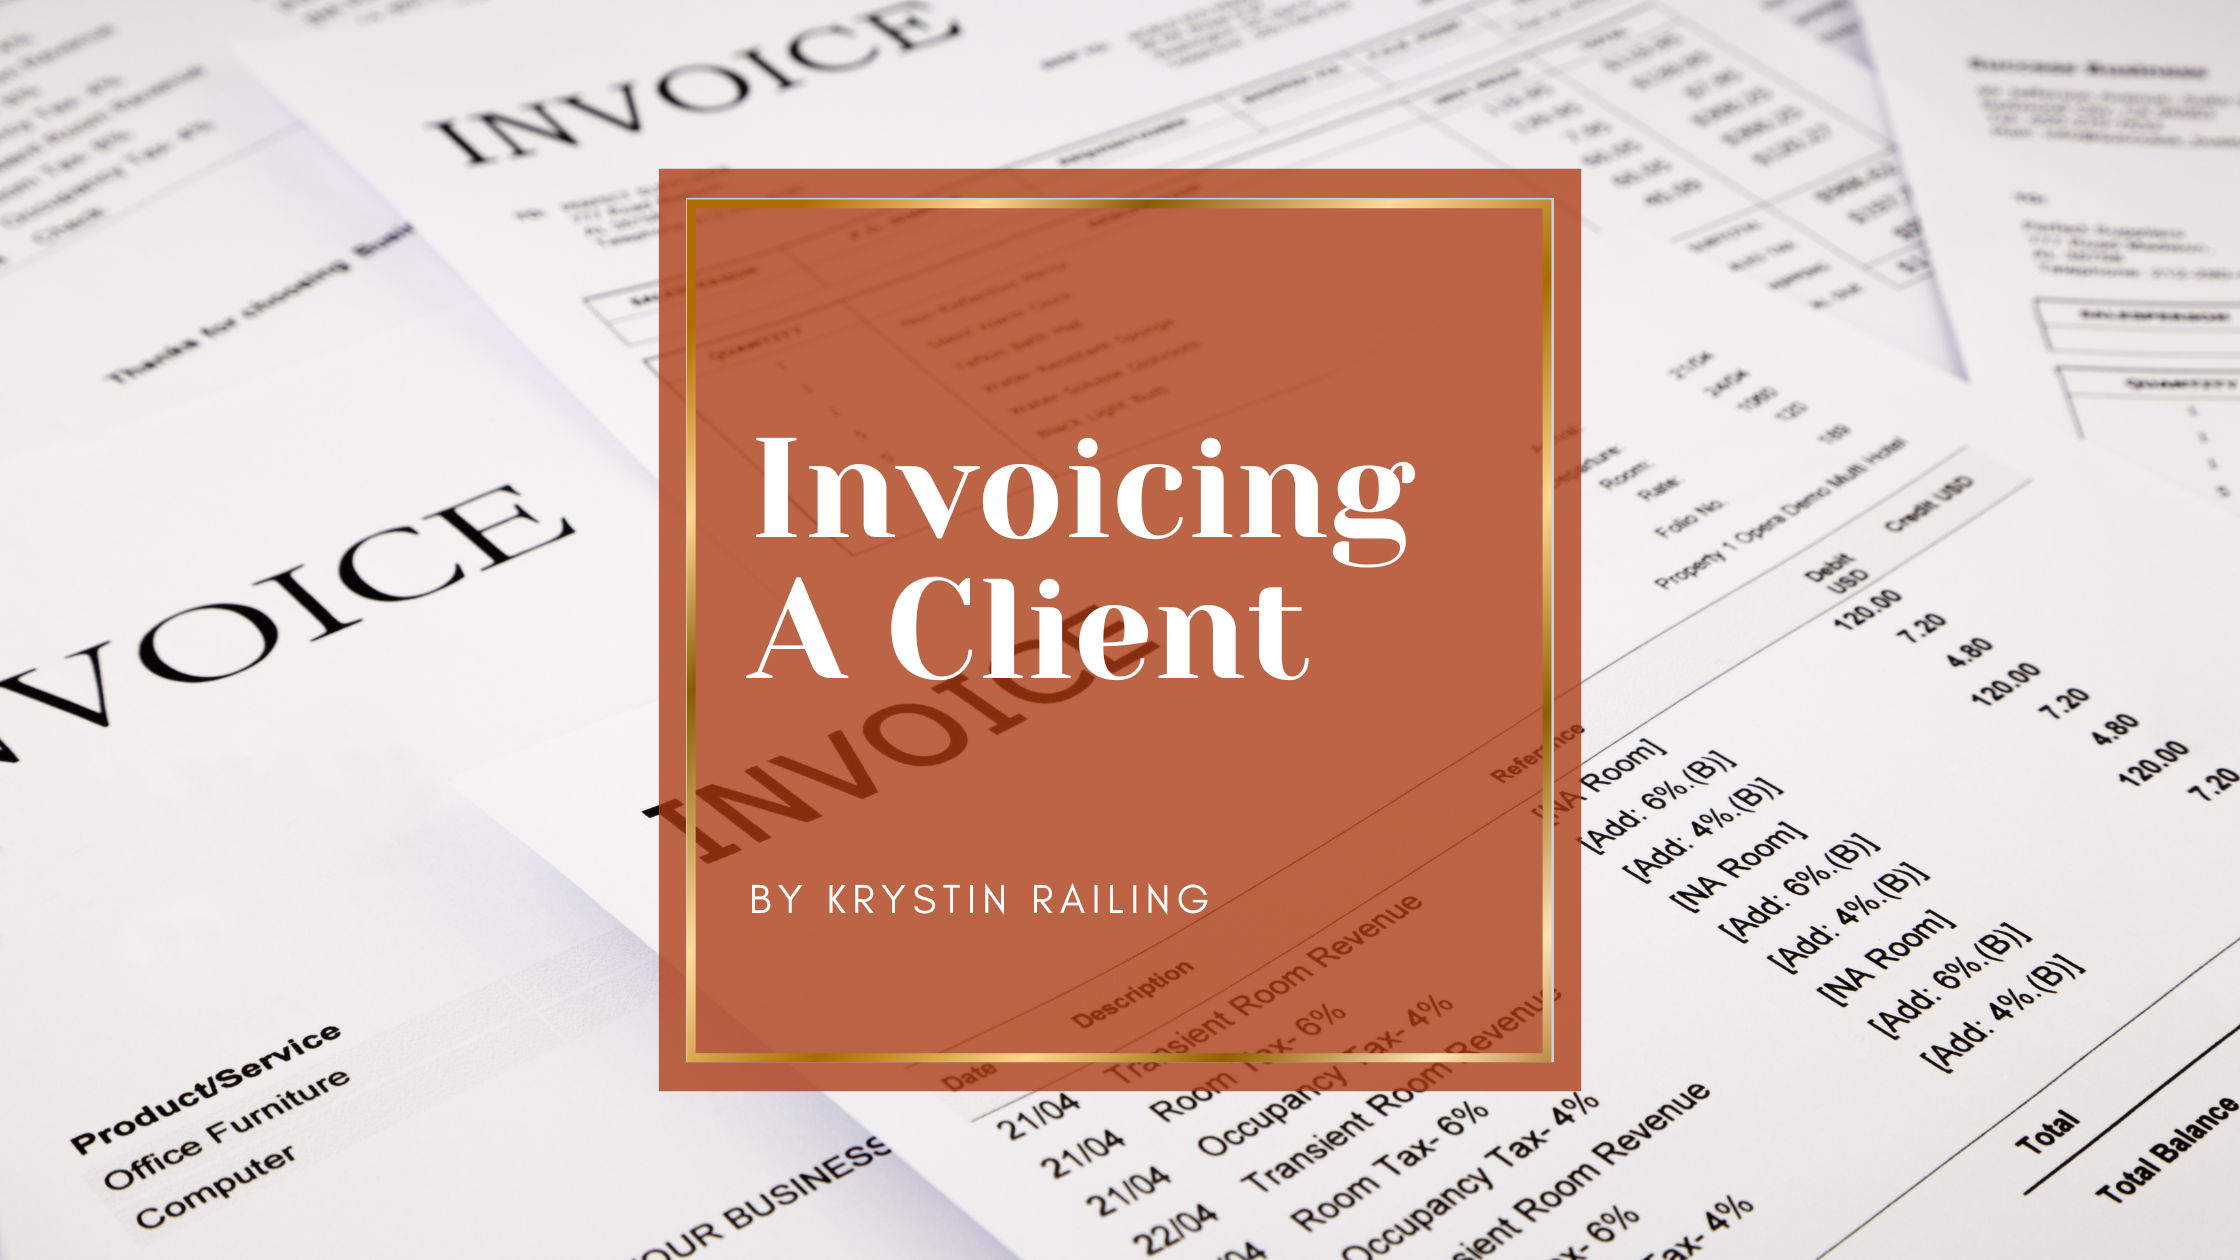 Invoicing a Client